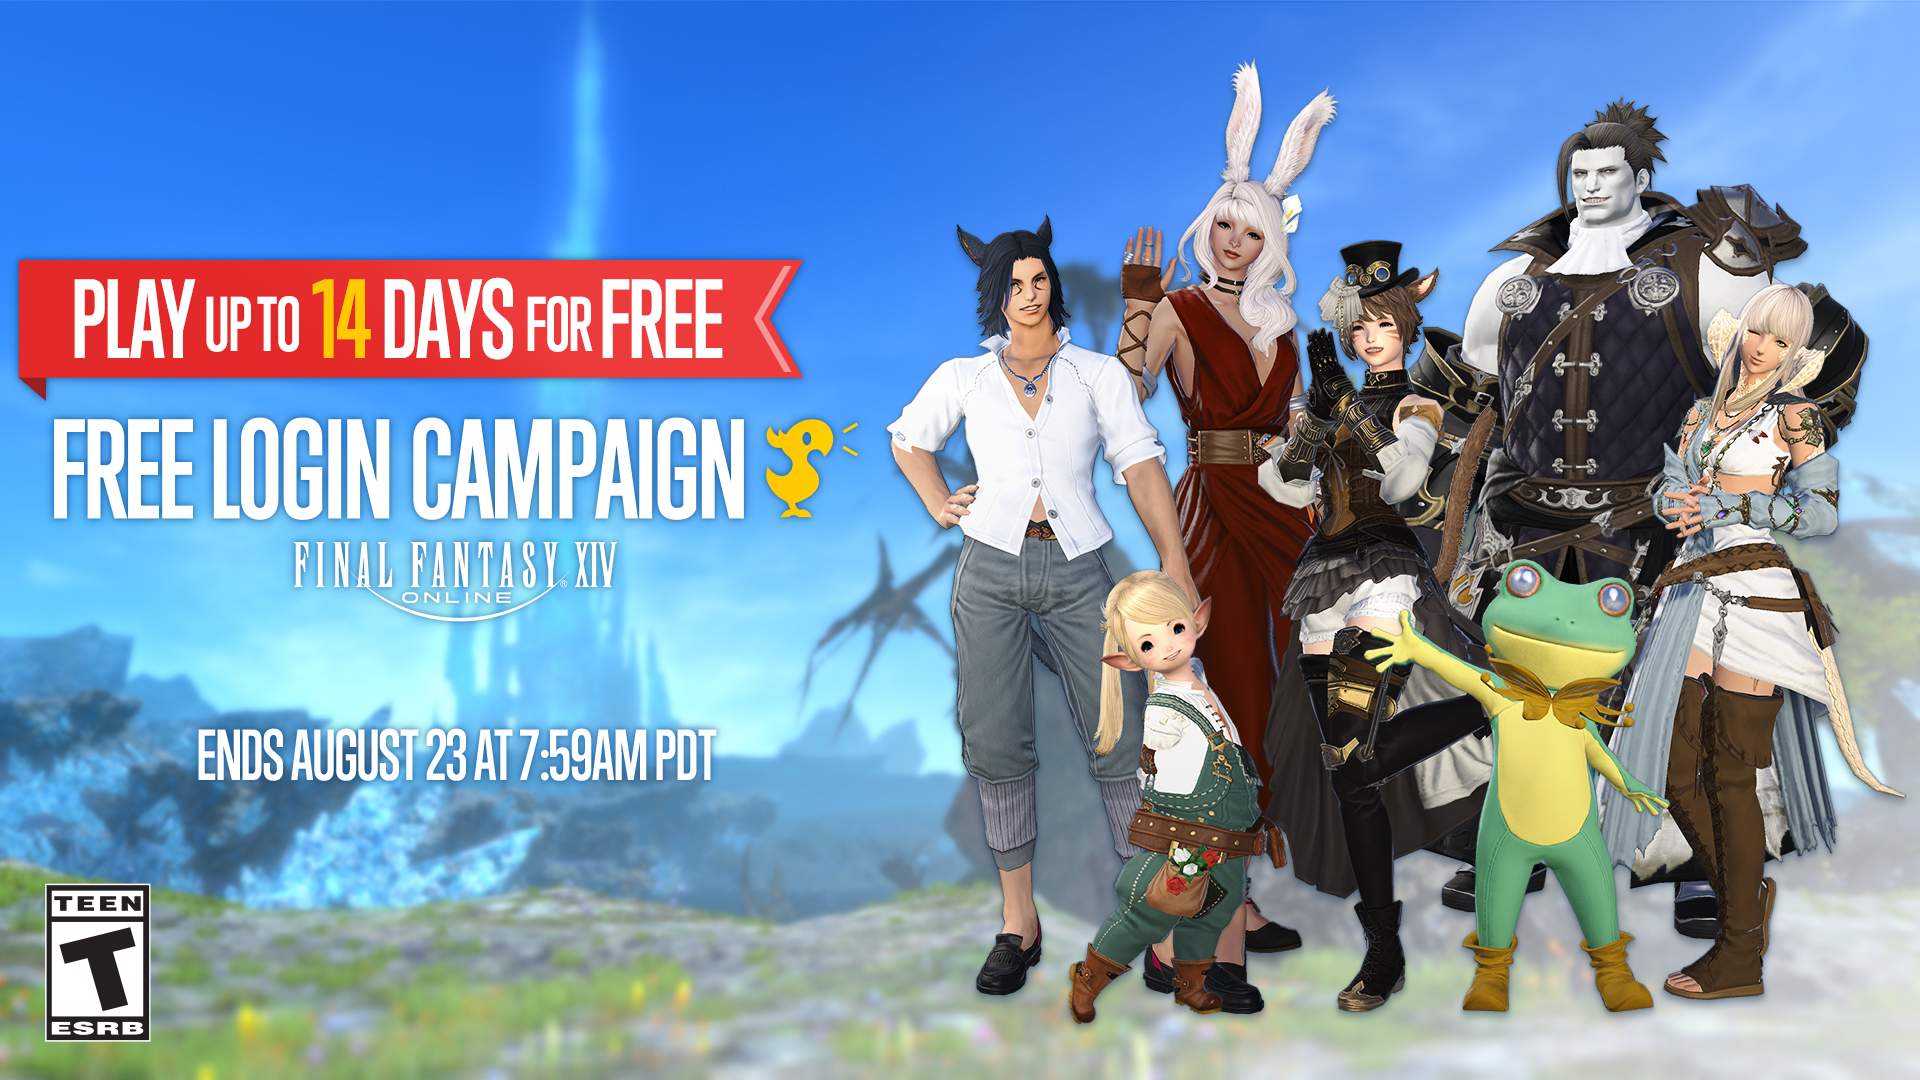 Final Fantasy XIV: Play Free for up to 14 days in the Latest Free Login Campaign!